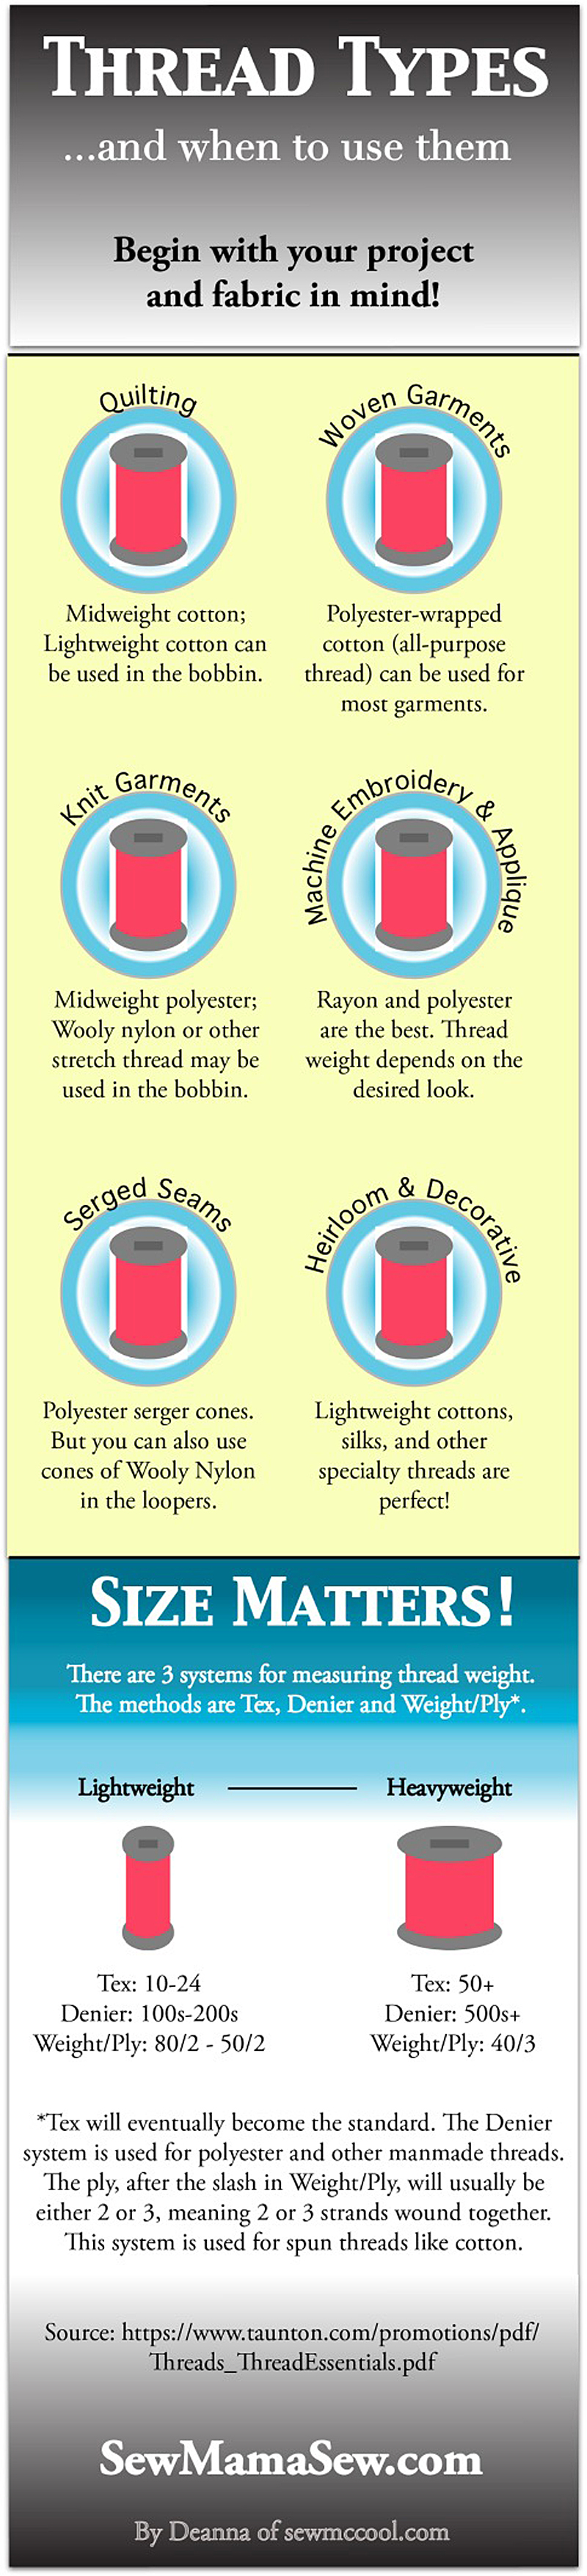 Everything you need to know about sewing thread at a glance. What threads are best for what fabrics and project types, and how is thread weight (or thickness) rated.